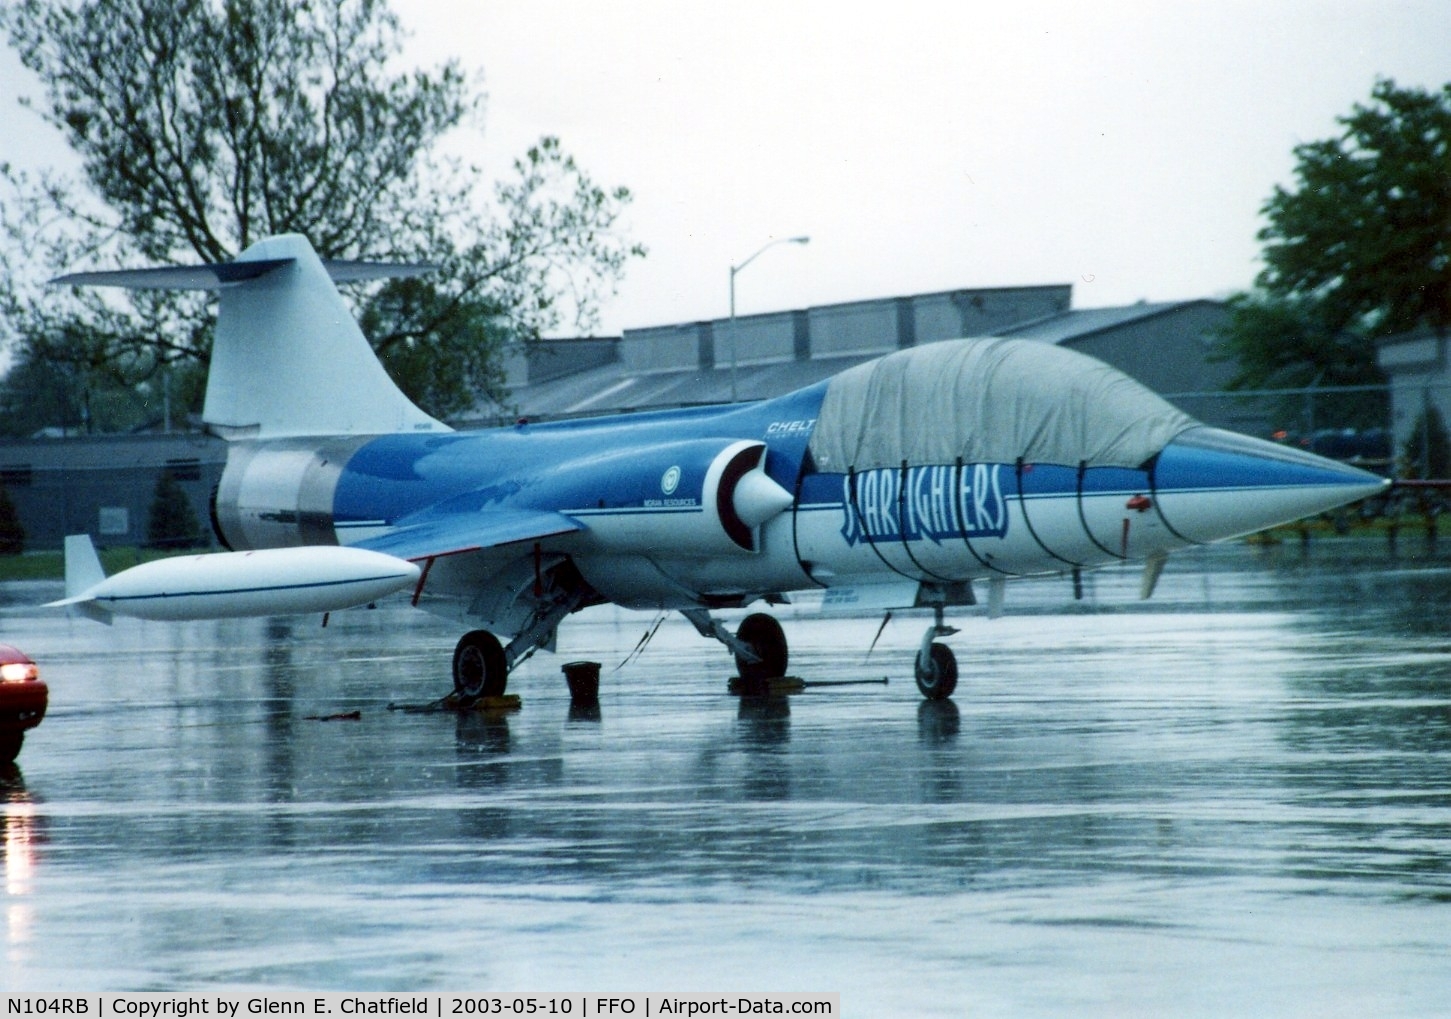 N104RB, 1962 Lockheed CF-104D Starfighter C/N 583A-5302, At the 100th Anniversary of Flight celebration, heavy down-pour cancelled the show